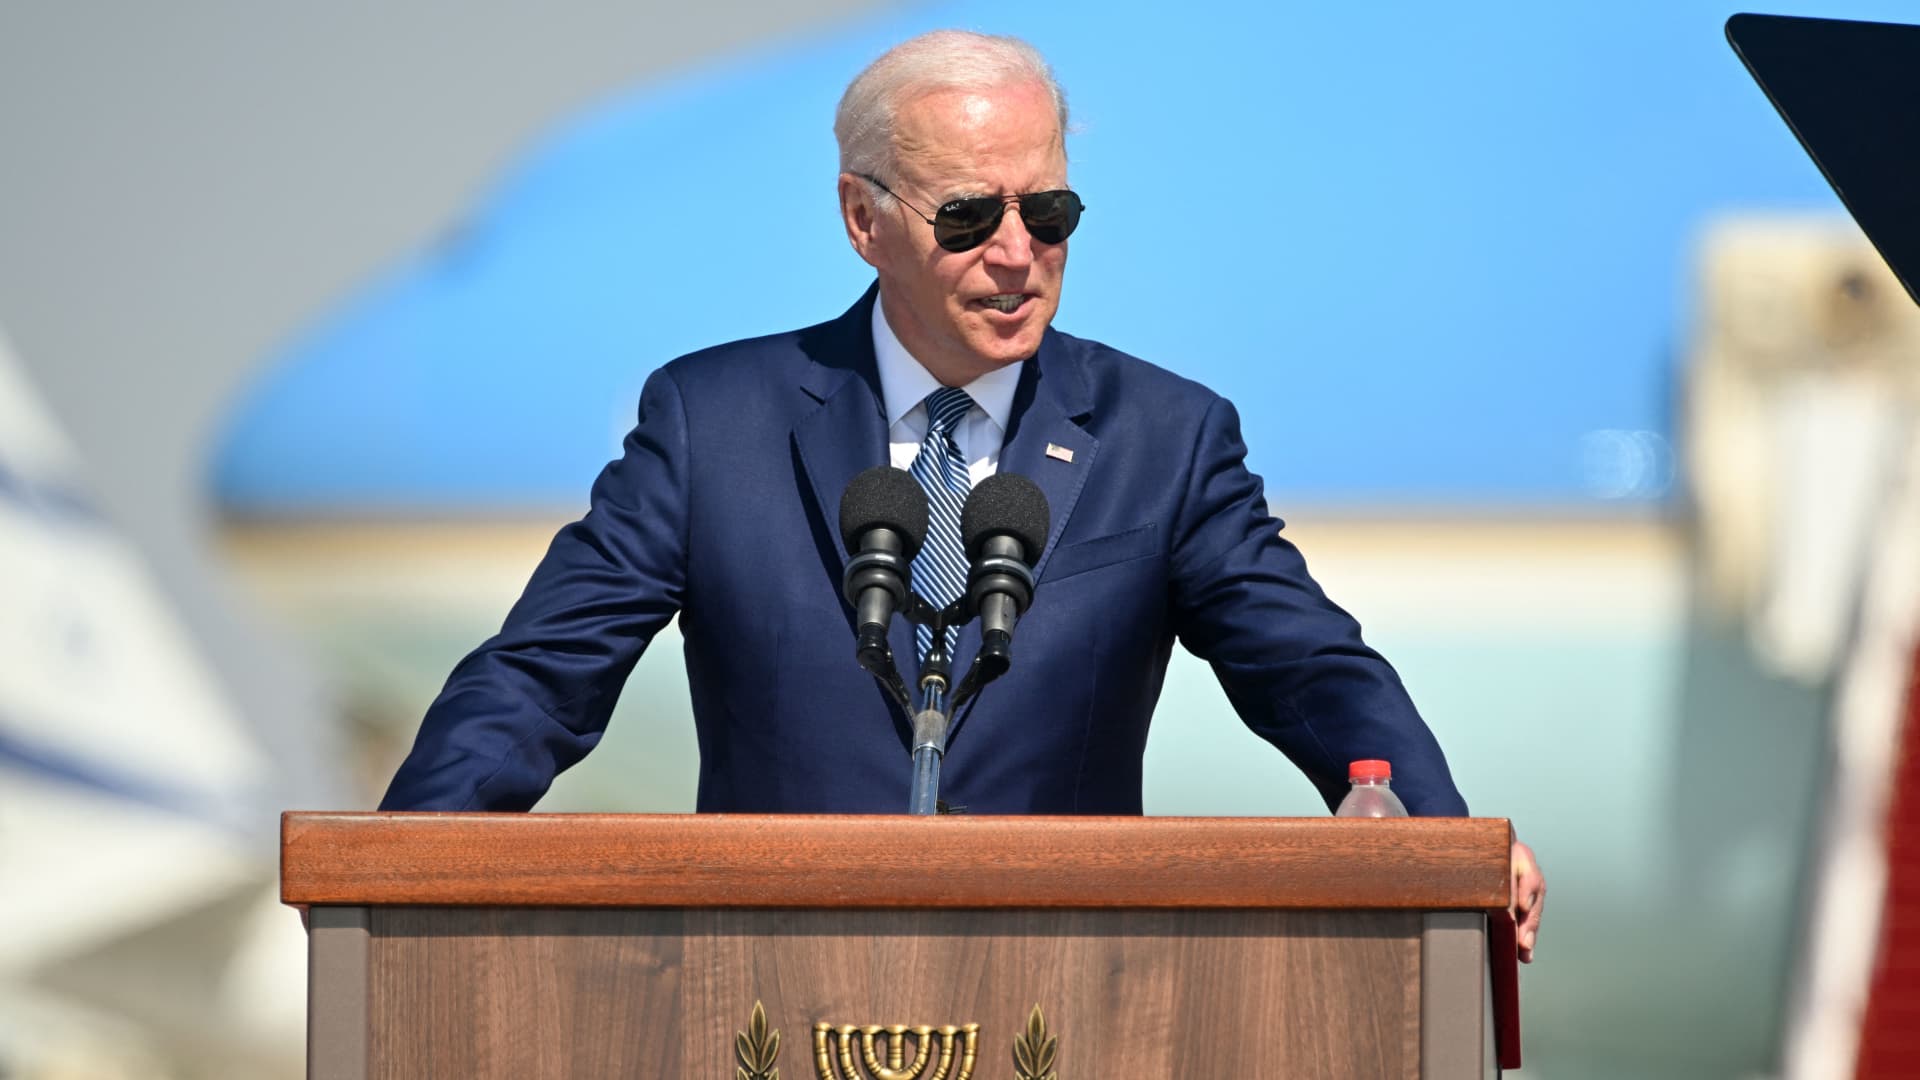 Biden’s economic approval rating falls to new low on fear about inflation, CNBC survey finds